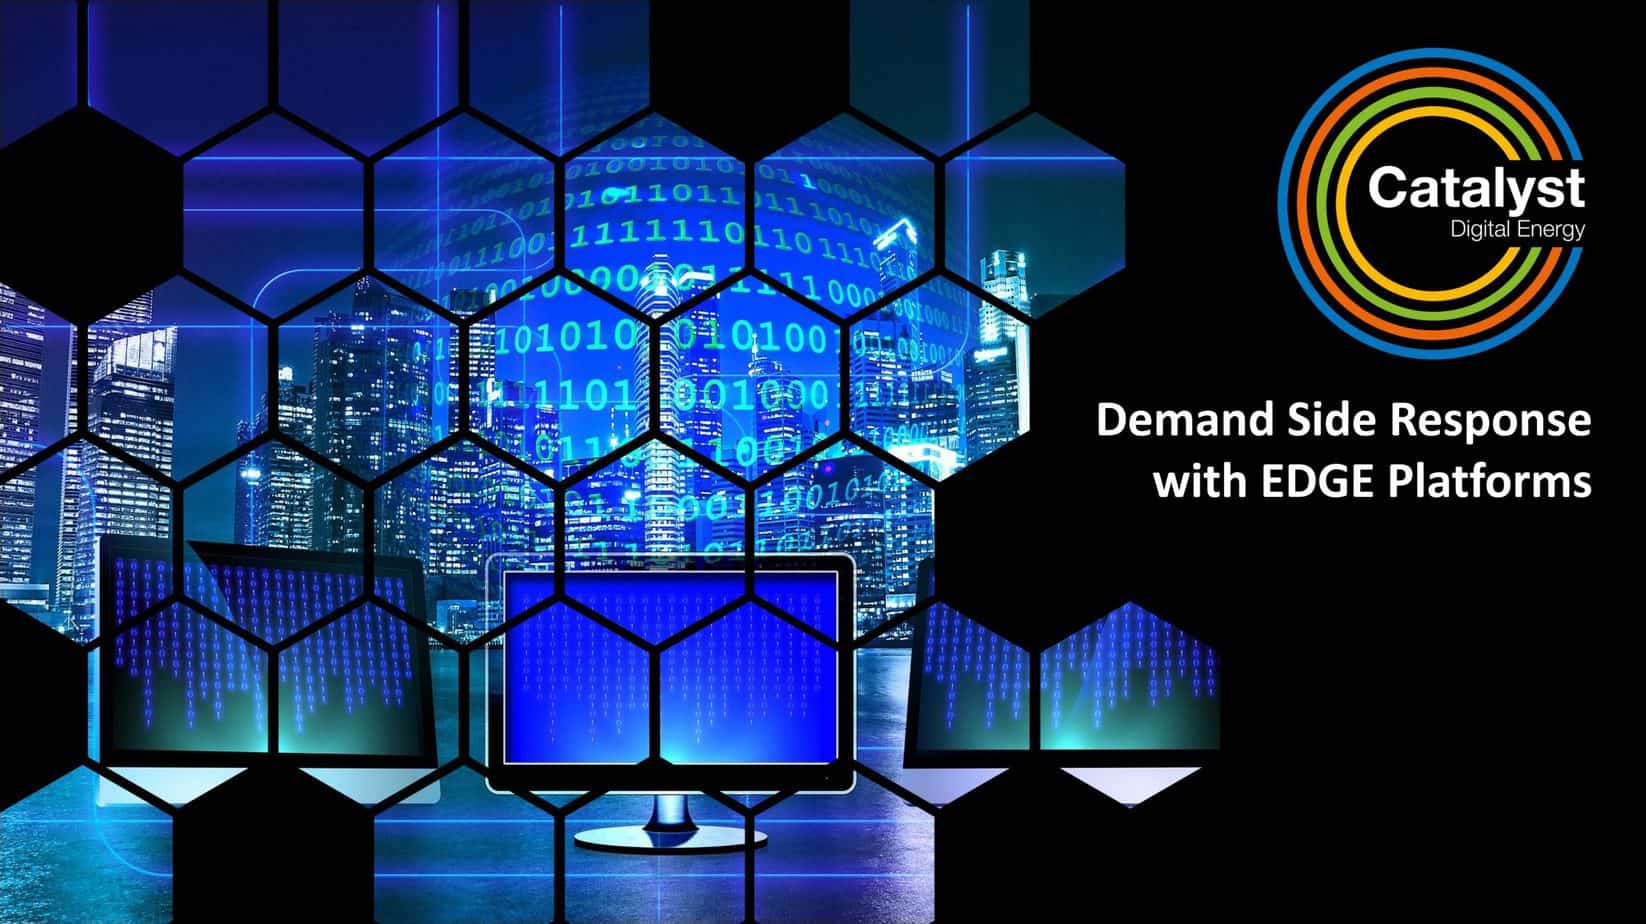 Demand Side Response with EDGE Platforms